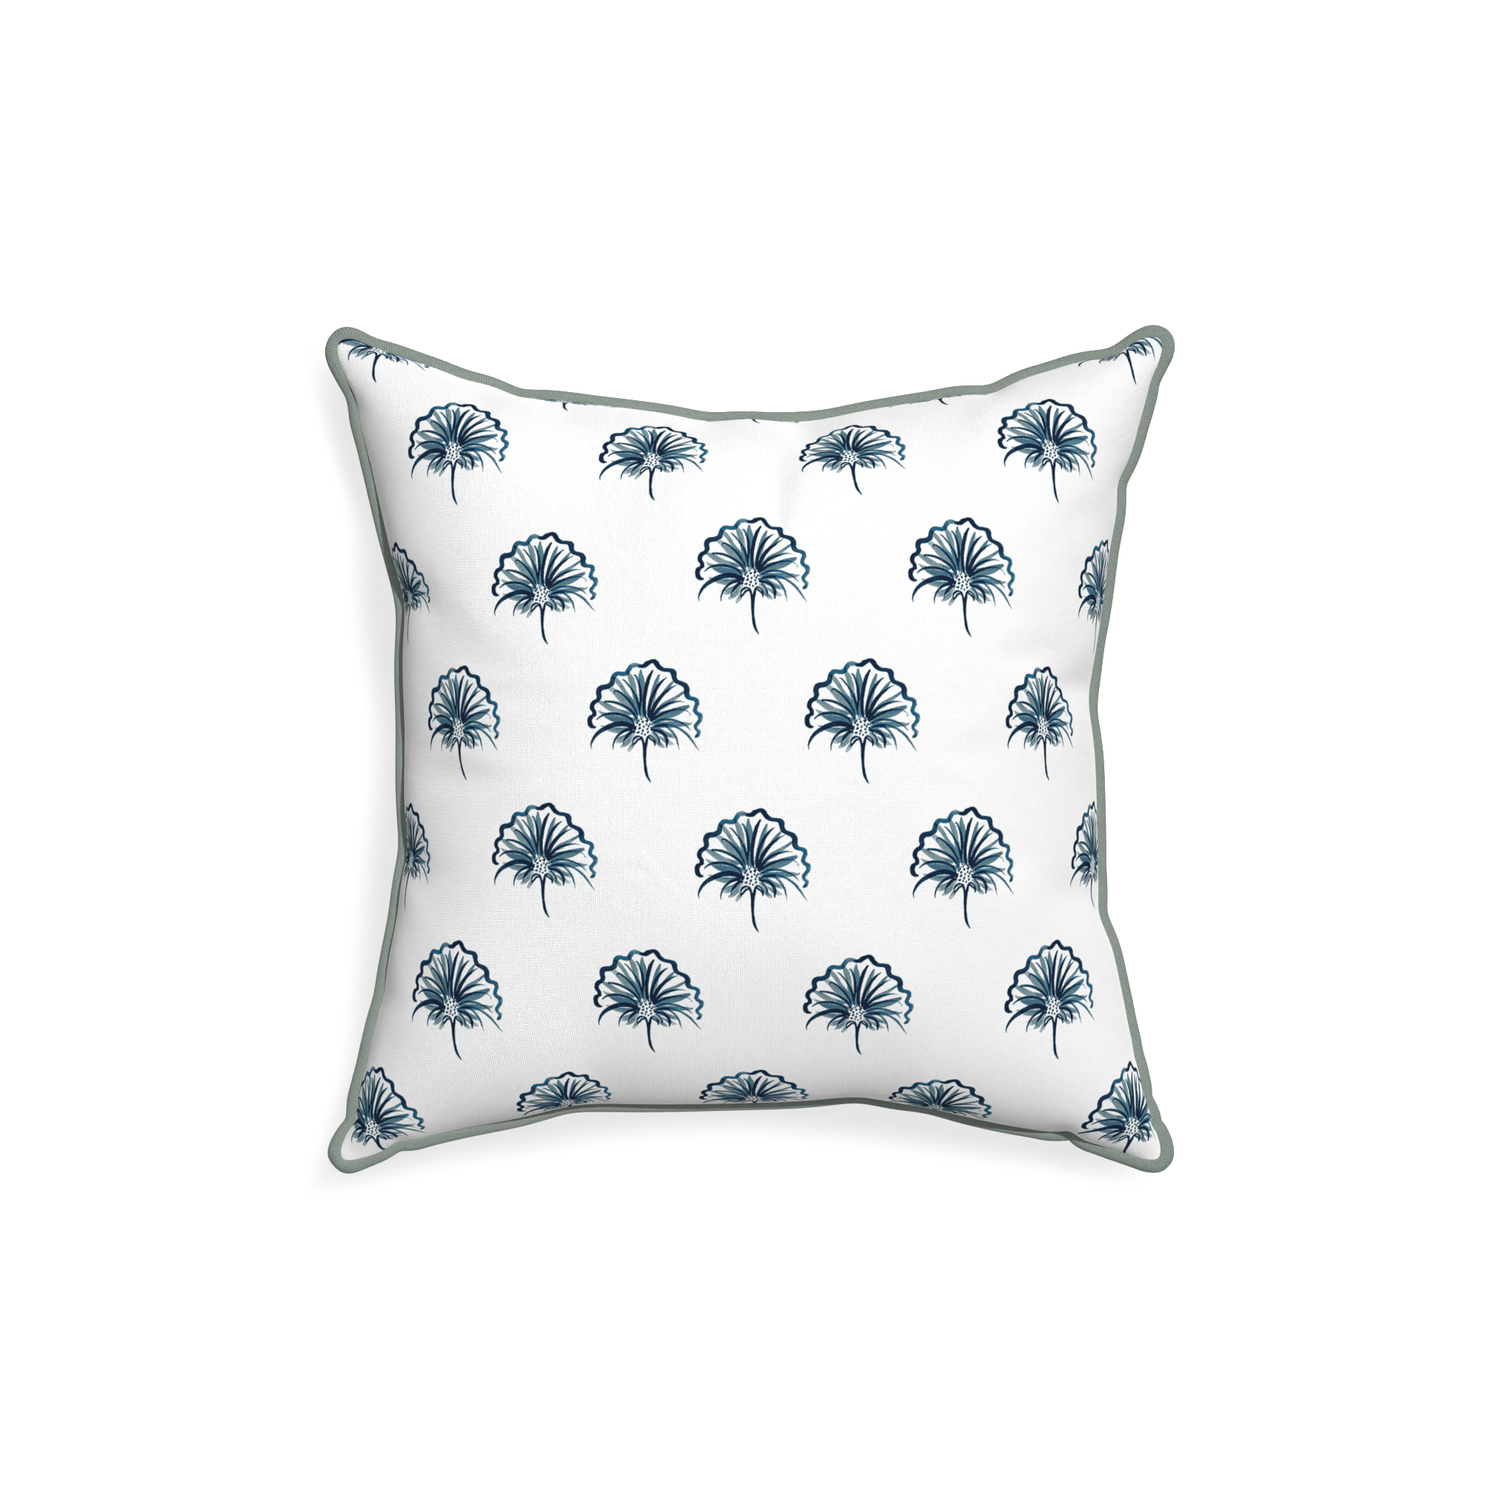 18-square penelope midnight custom floral navypillow with sage piping on white background